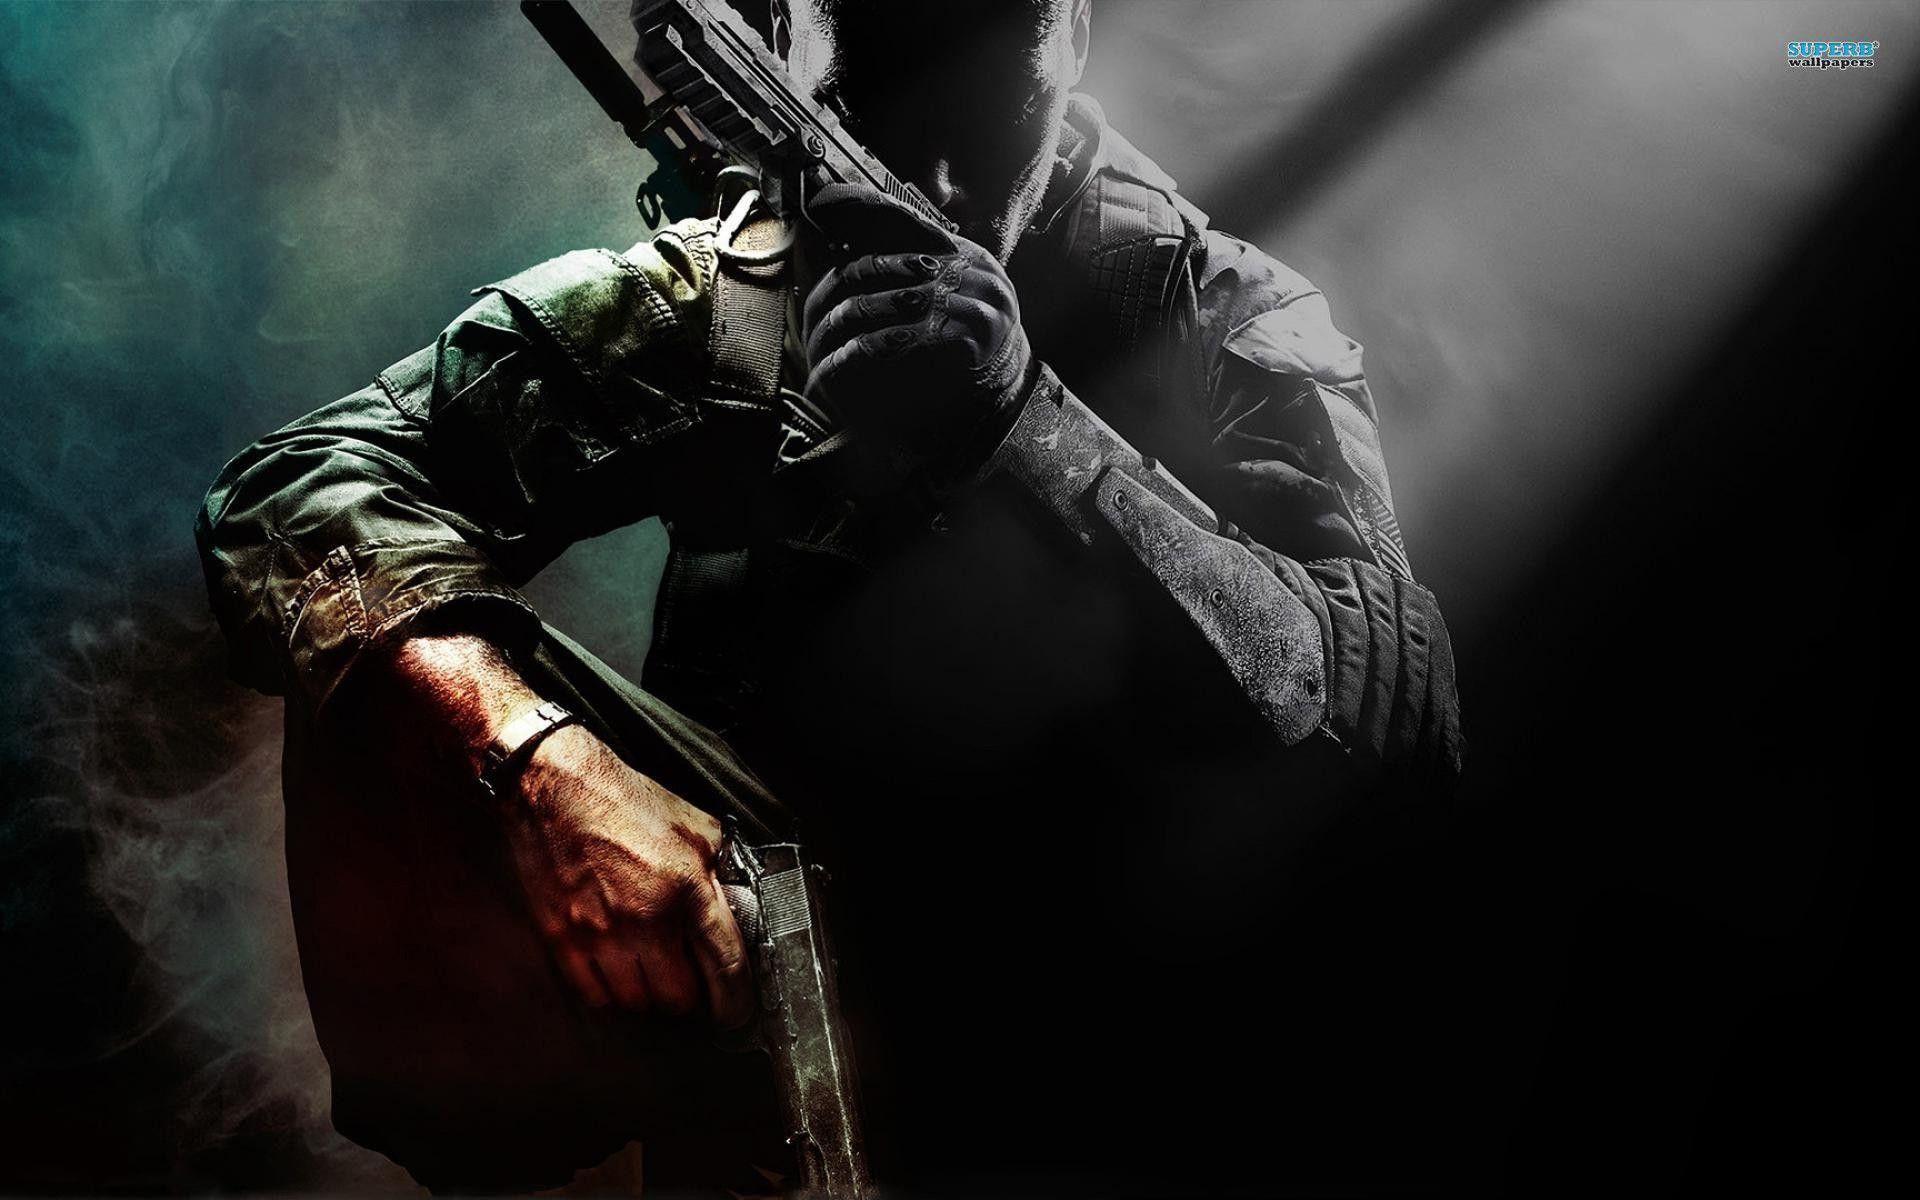 Cool Call of Duty Wallpapers 61 images